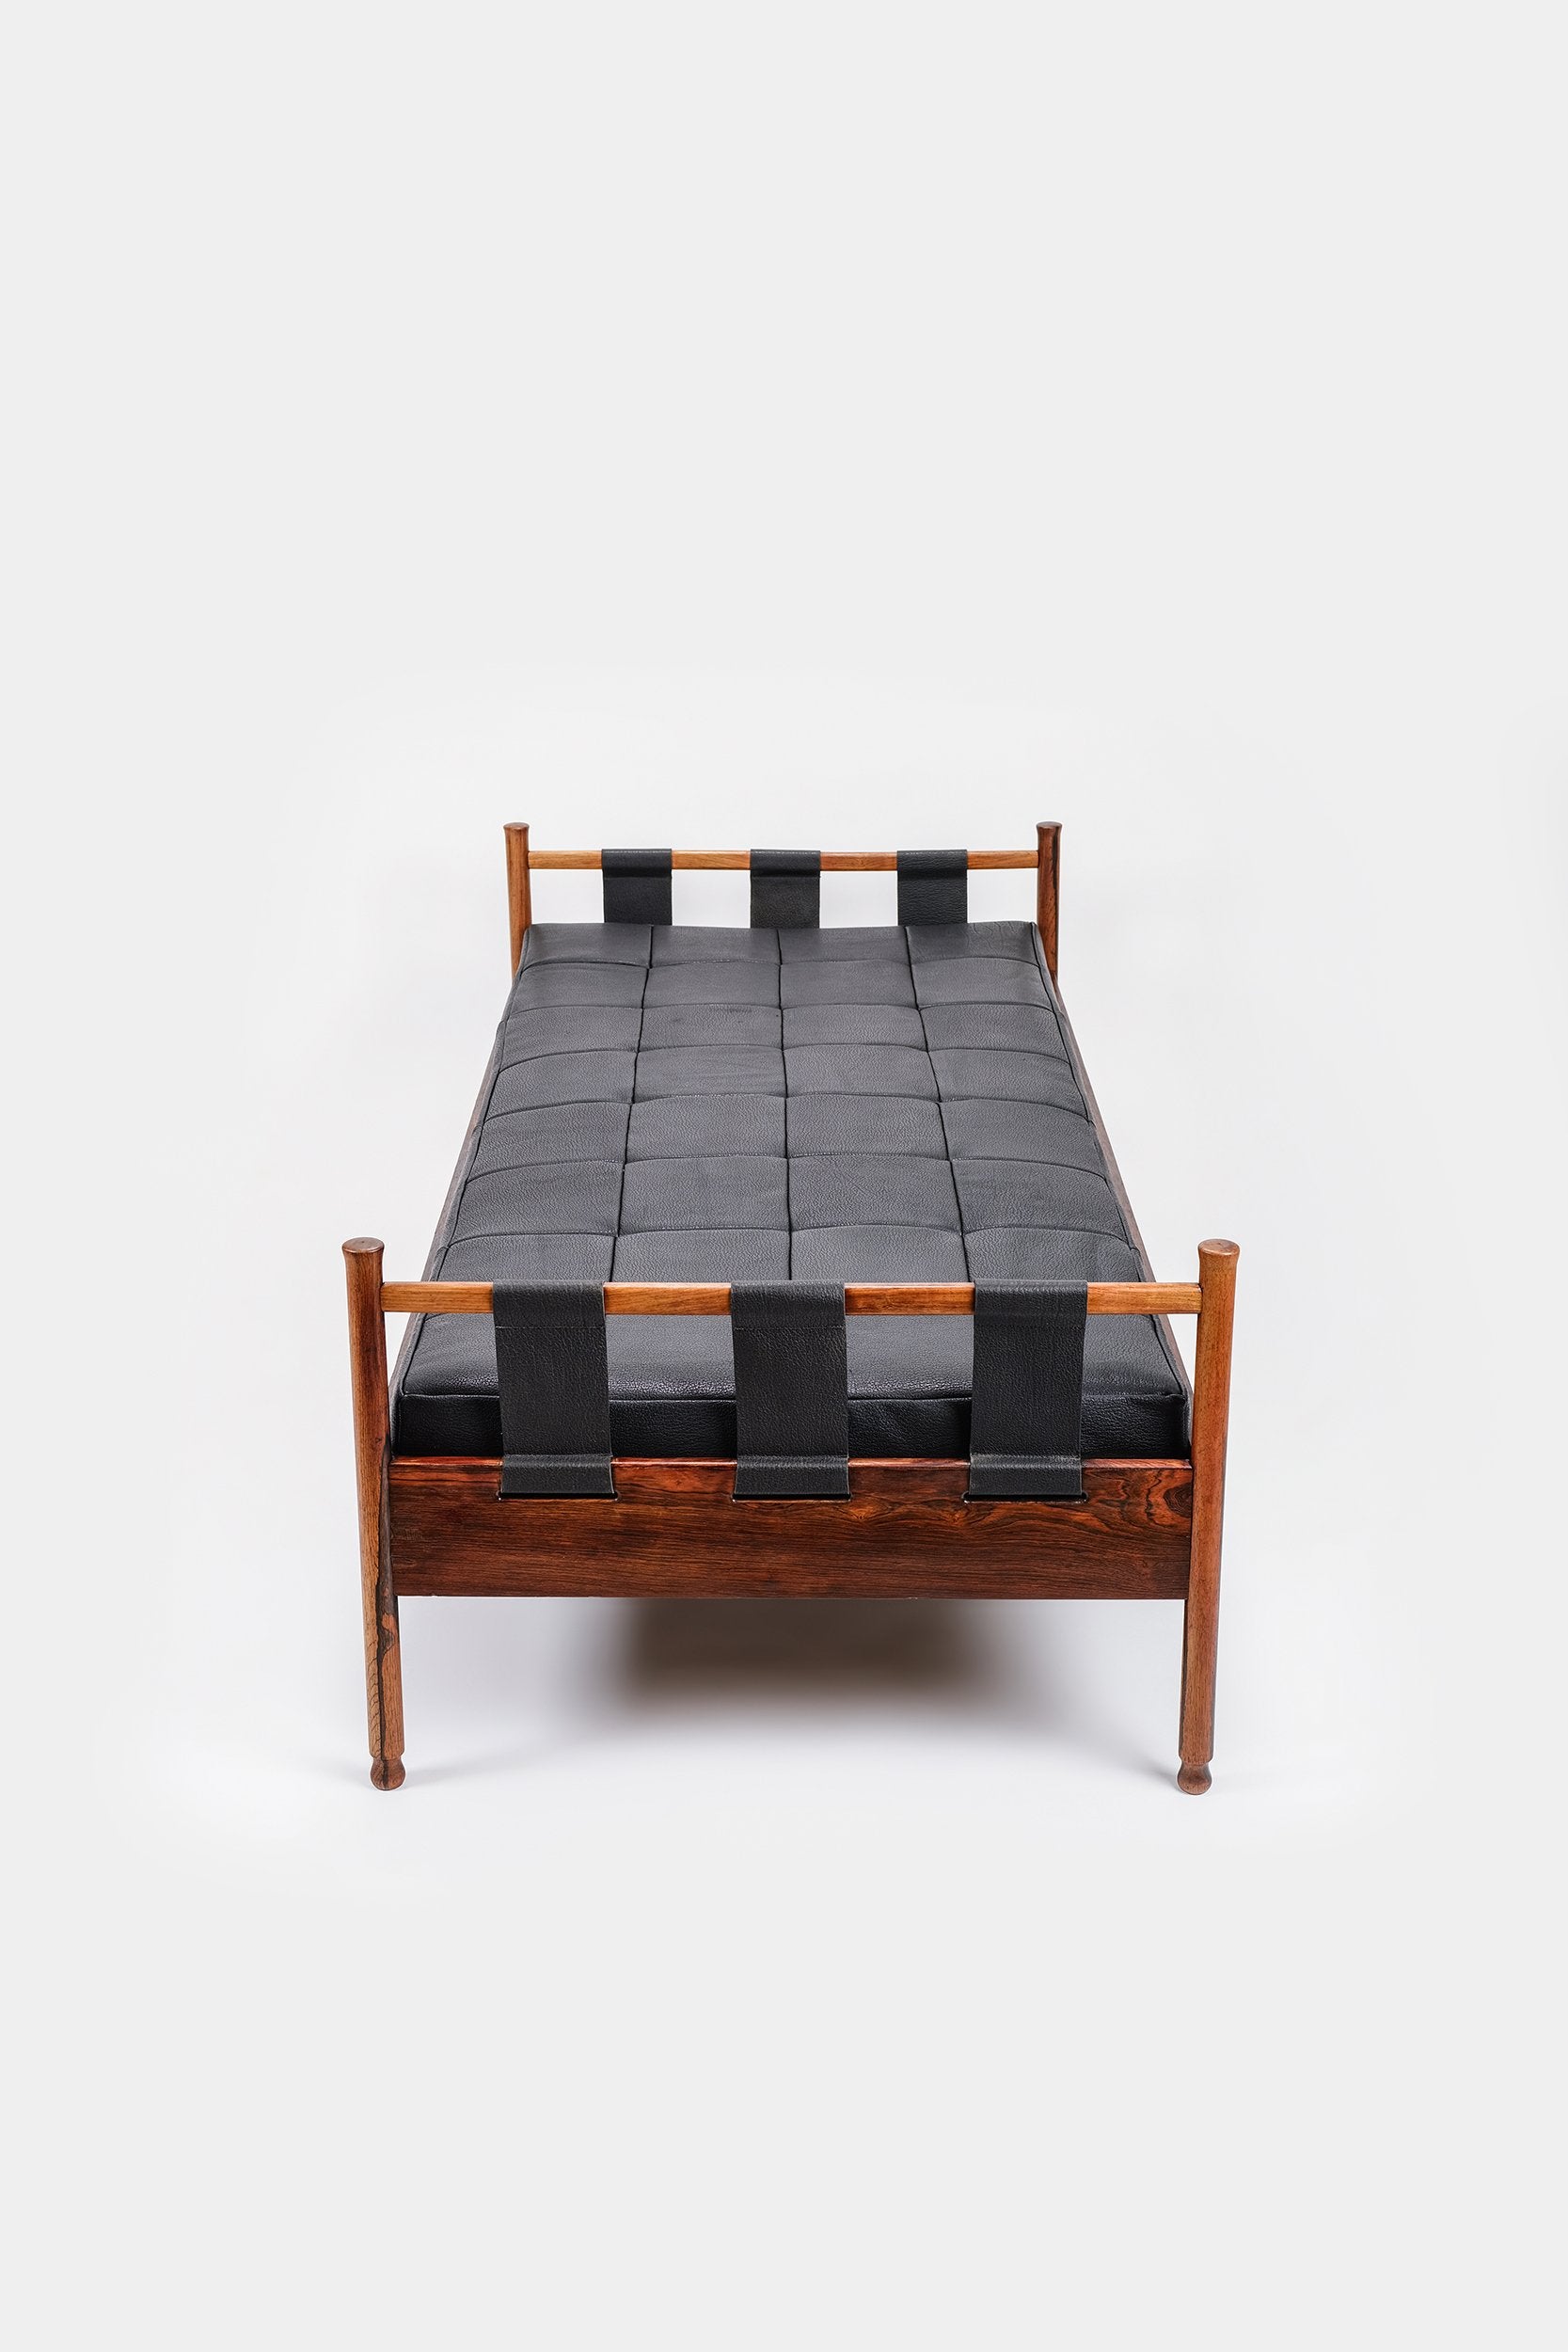 Marco Comolli Palisander Daybed, Mobilia, Italy, 60s